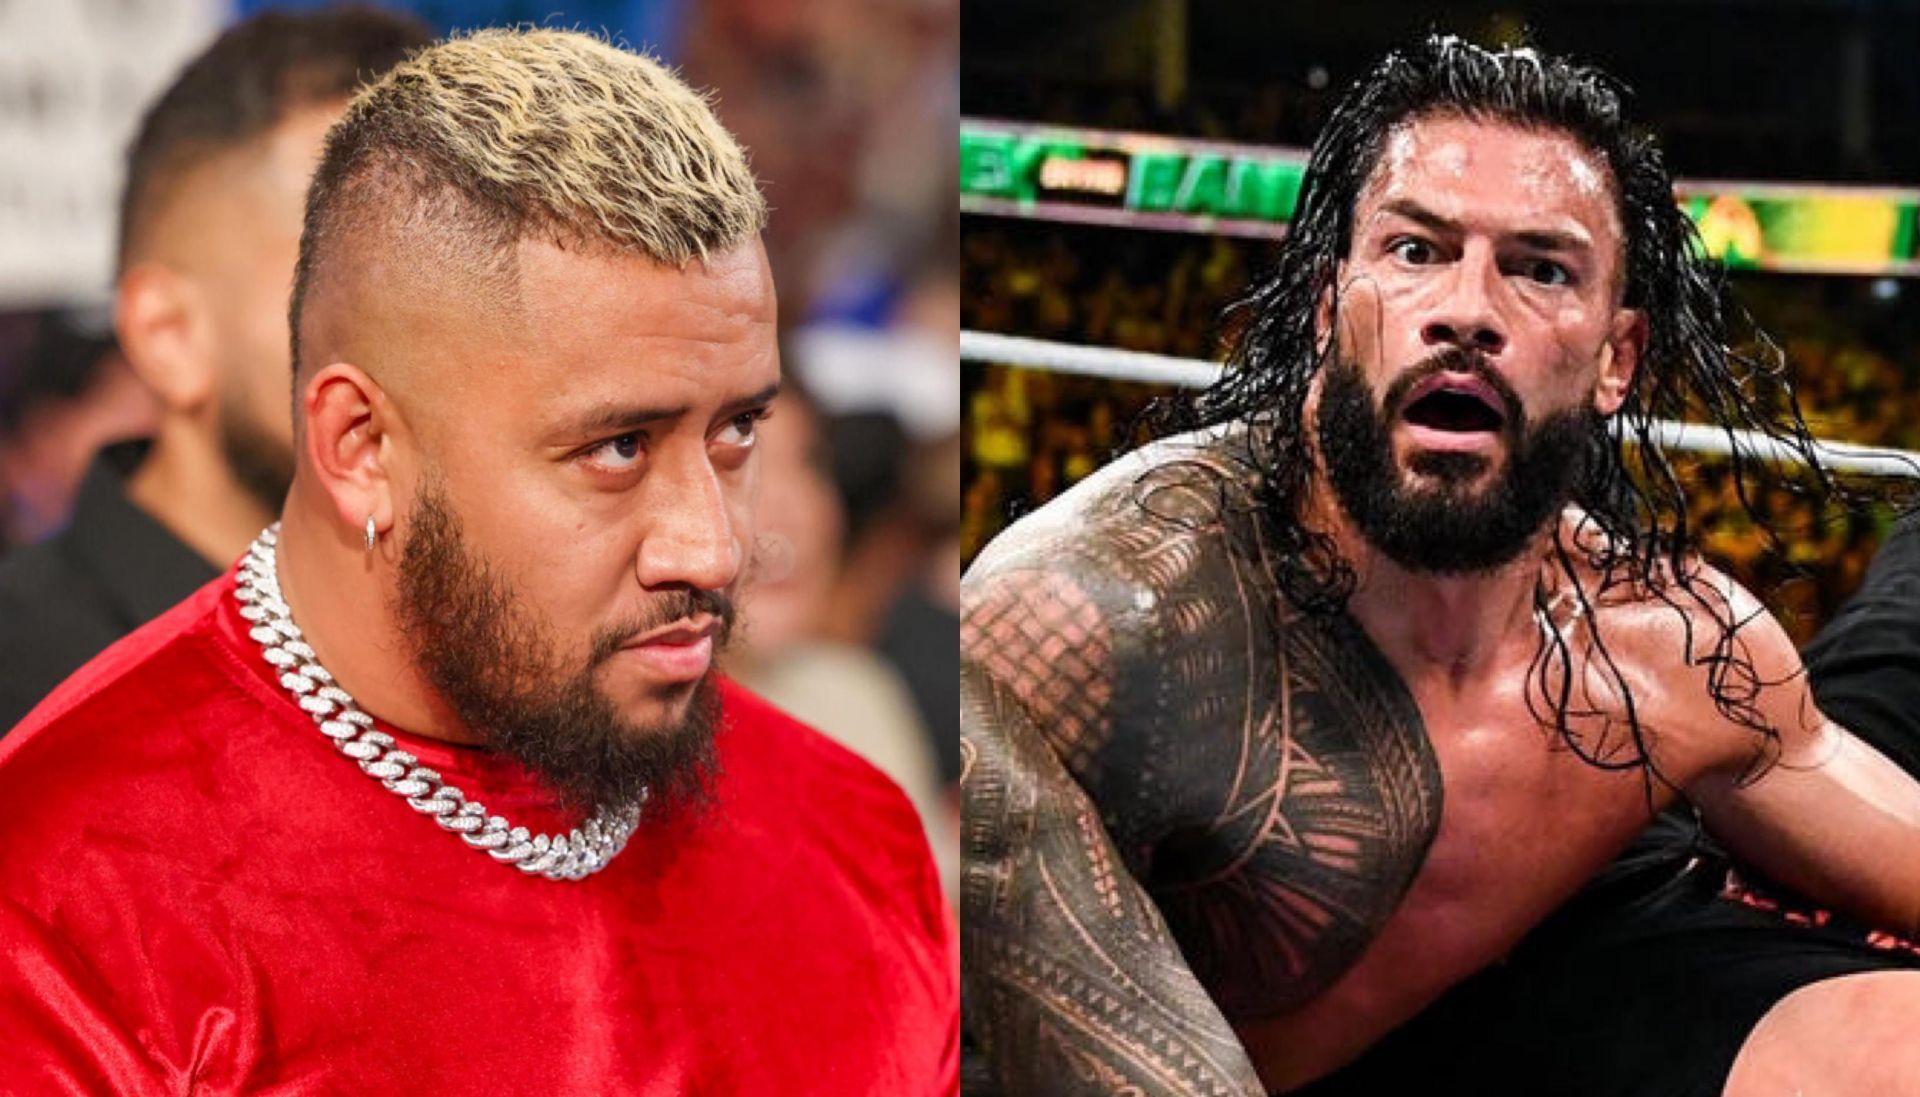 Solo Sikoa and Roman Reigns are bound to be on a collision course (Image Credits: WWE.com)